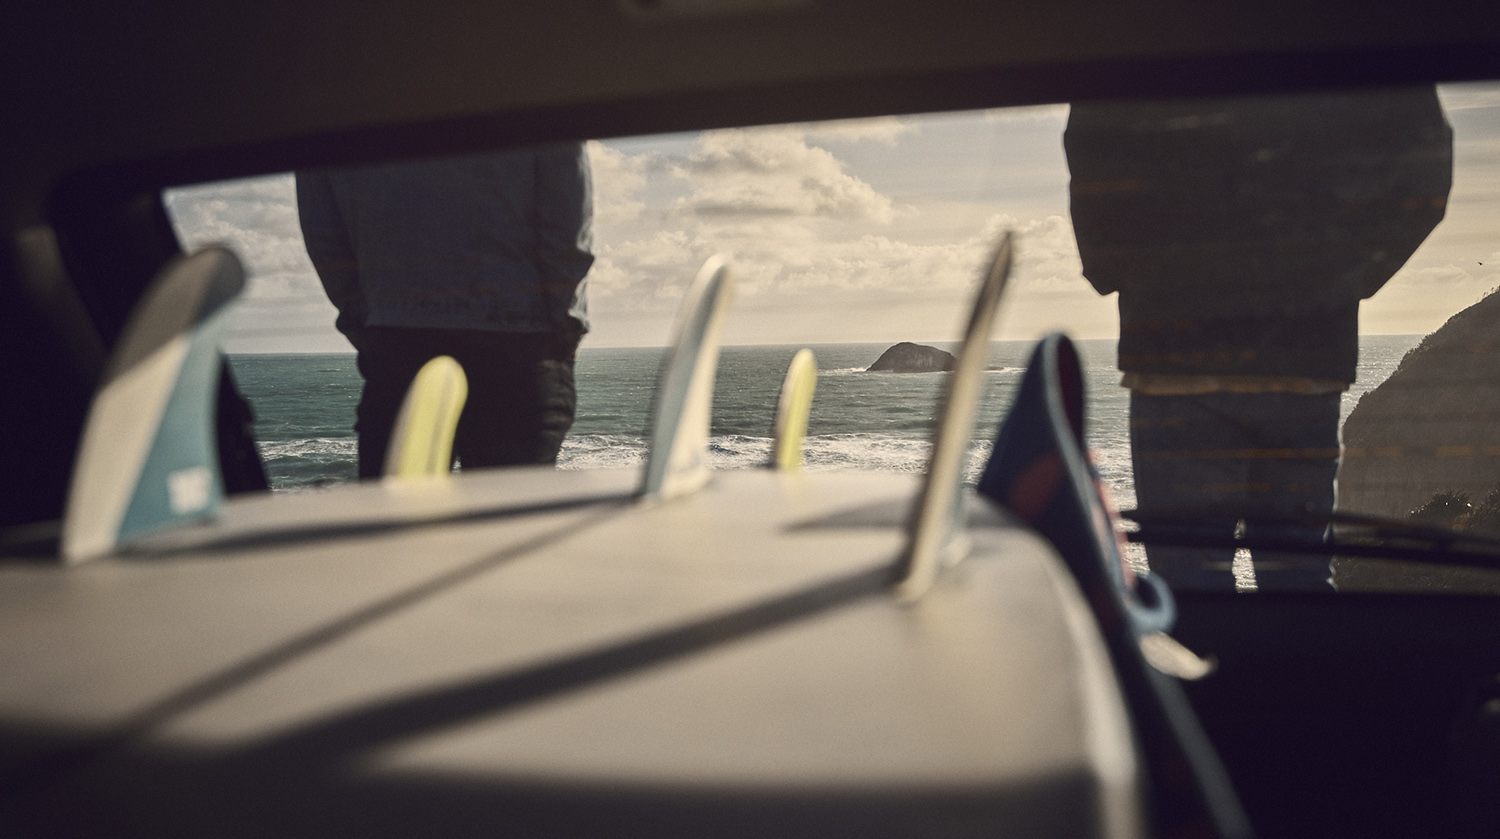 IVDM Photography_adventure_commercial photography_surfboards in back of car.jpg